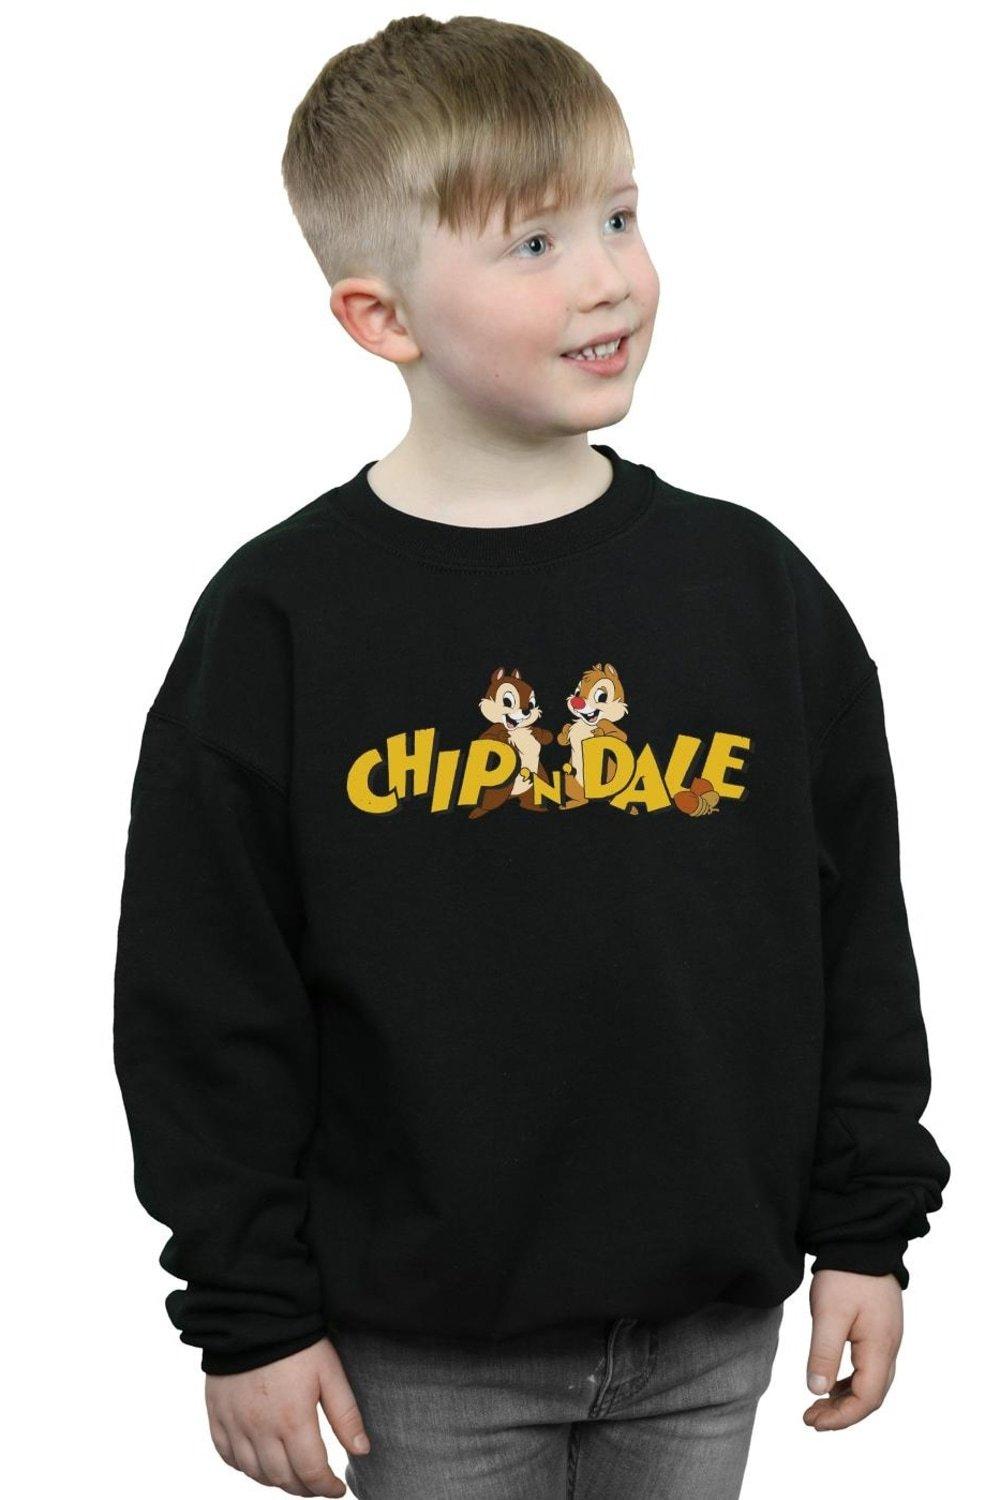 Chip And Dale Character Logo Sweatshirt